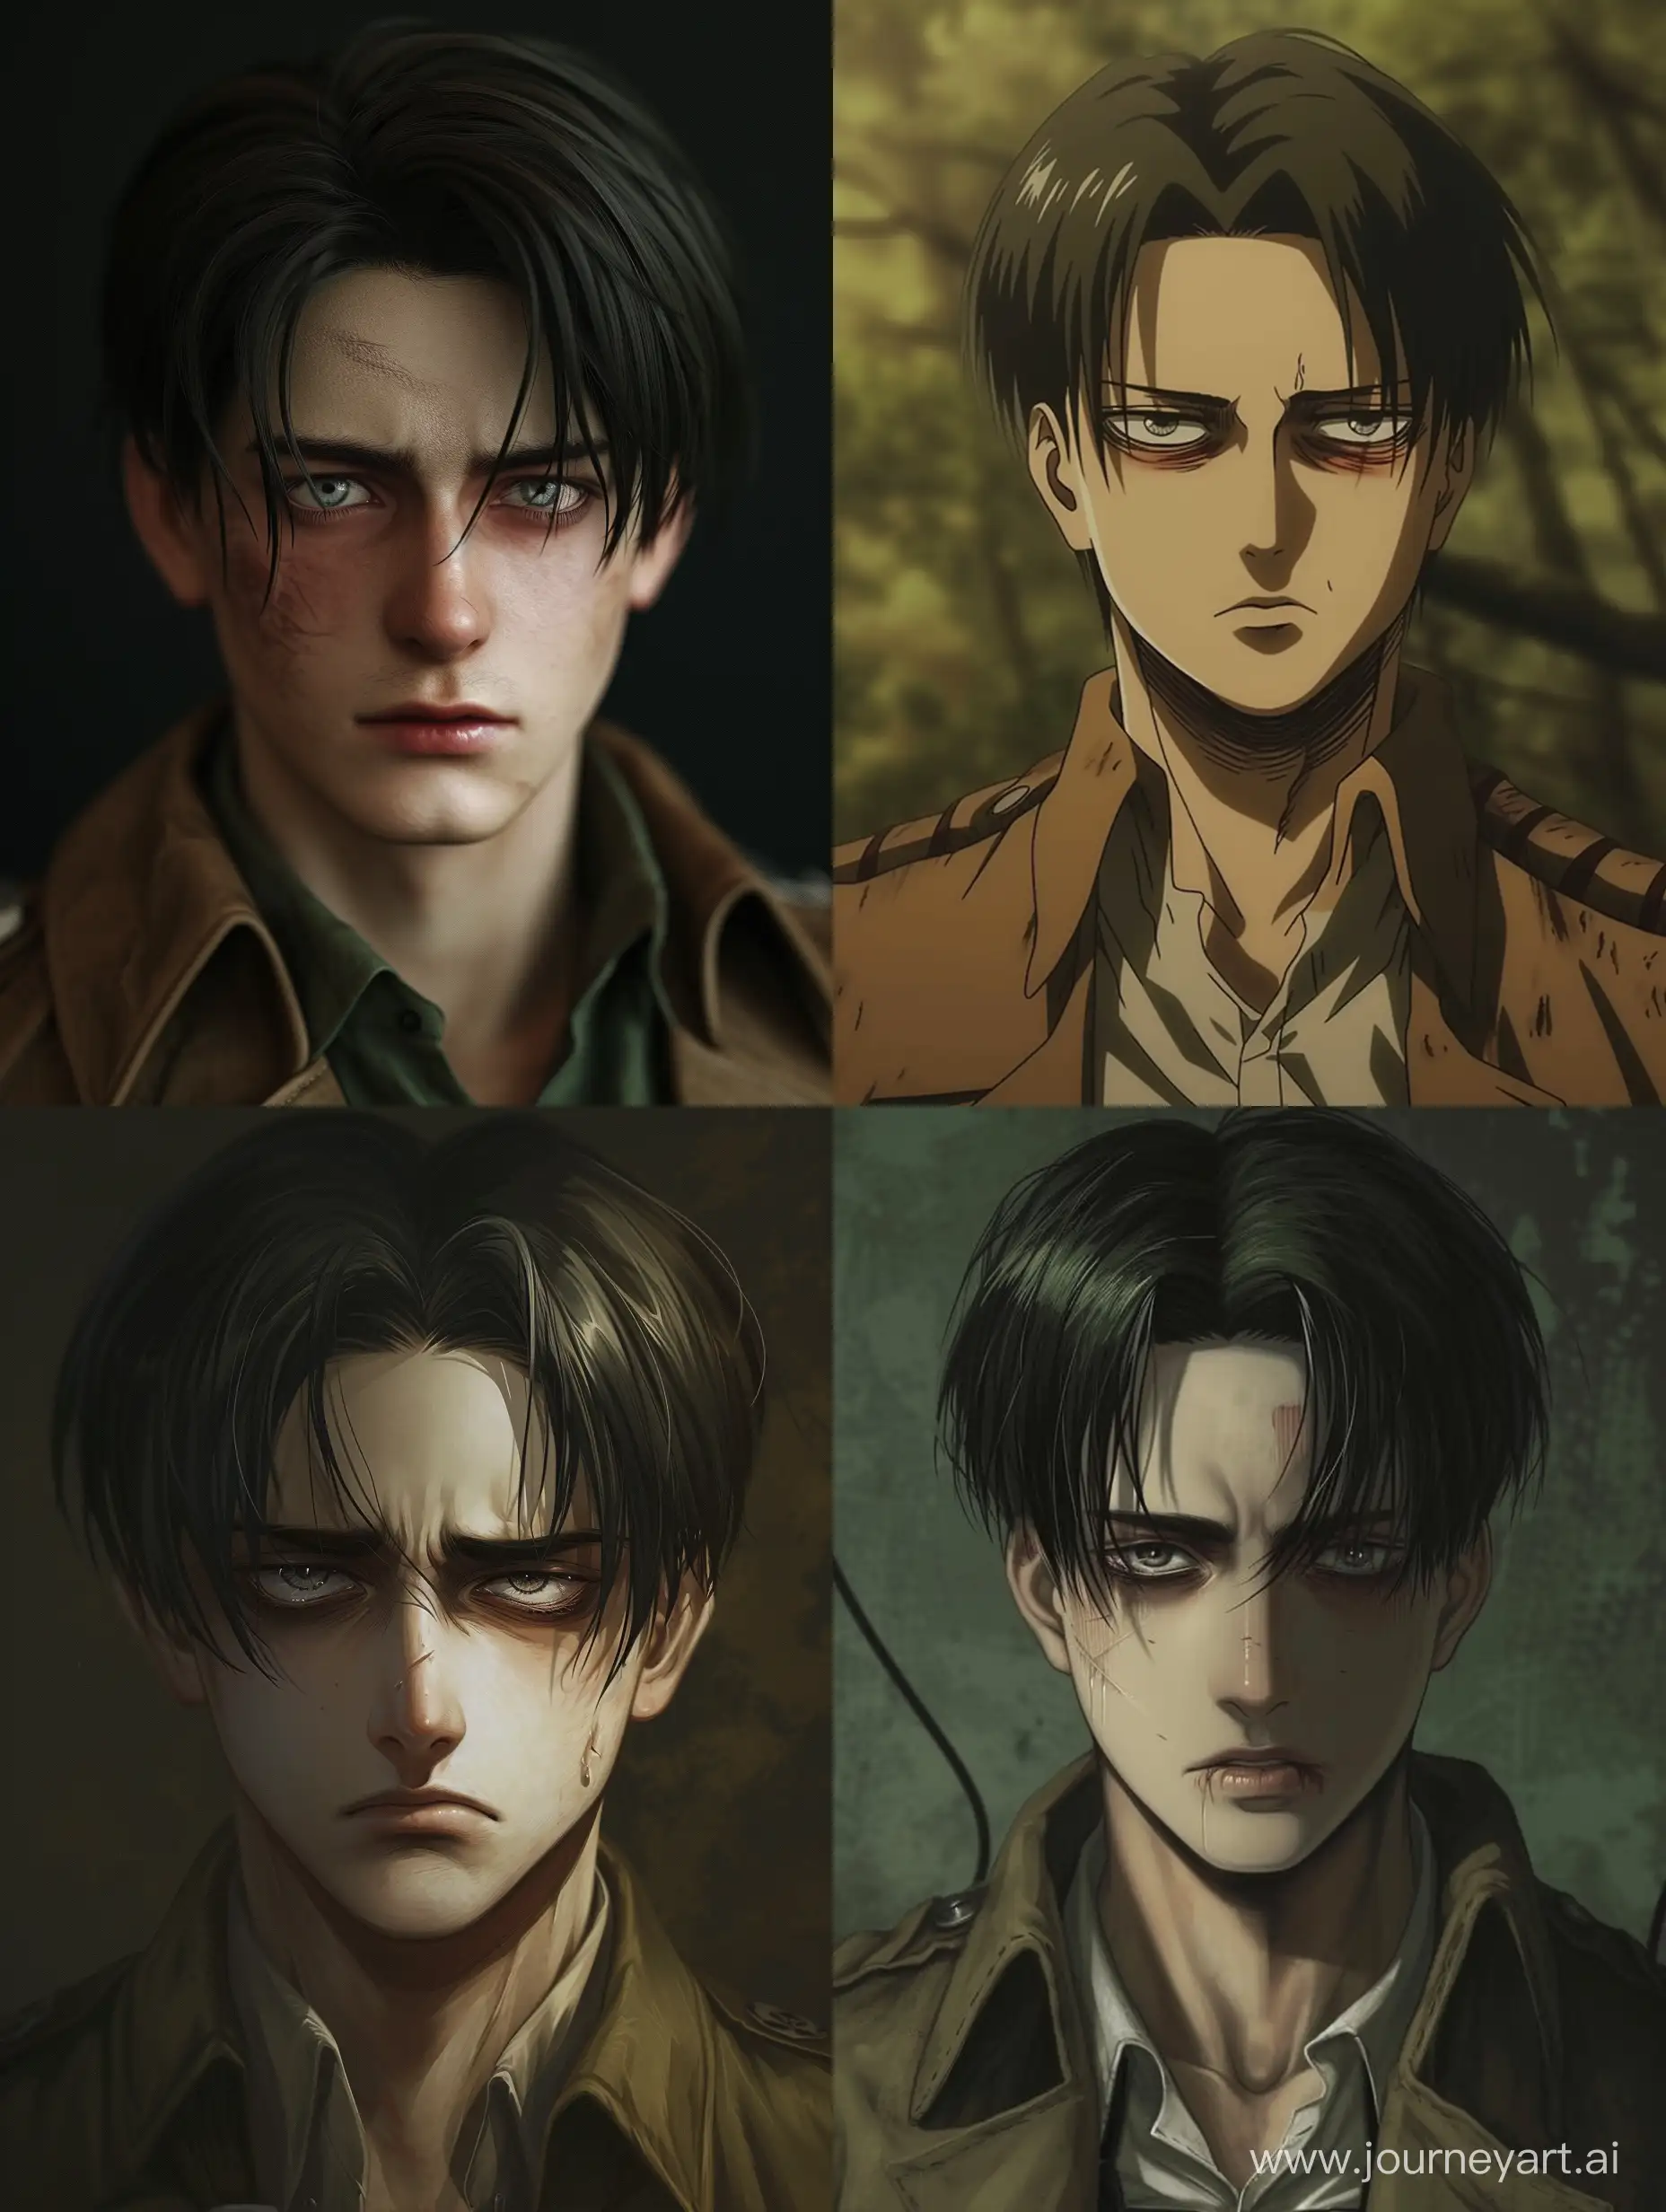 Realistic Levi Ackerman from Attack on Titan, in his 30s, with normal dark circles, slight mocking smirk, bored eyes with prominent whites